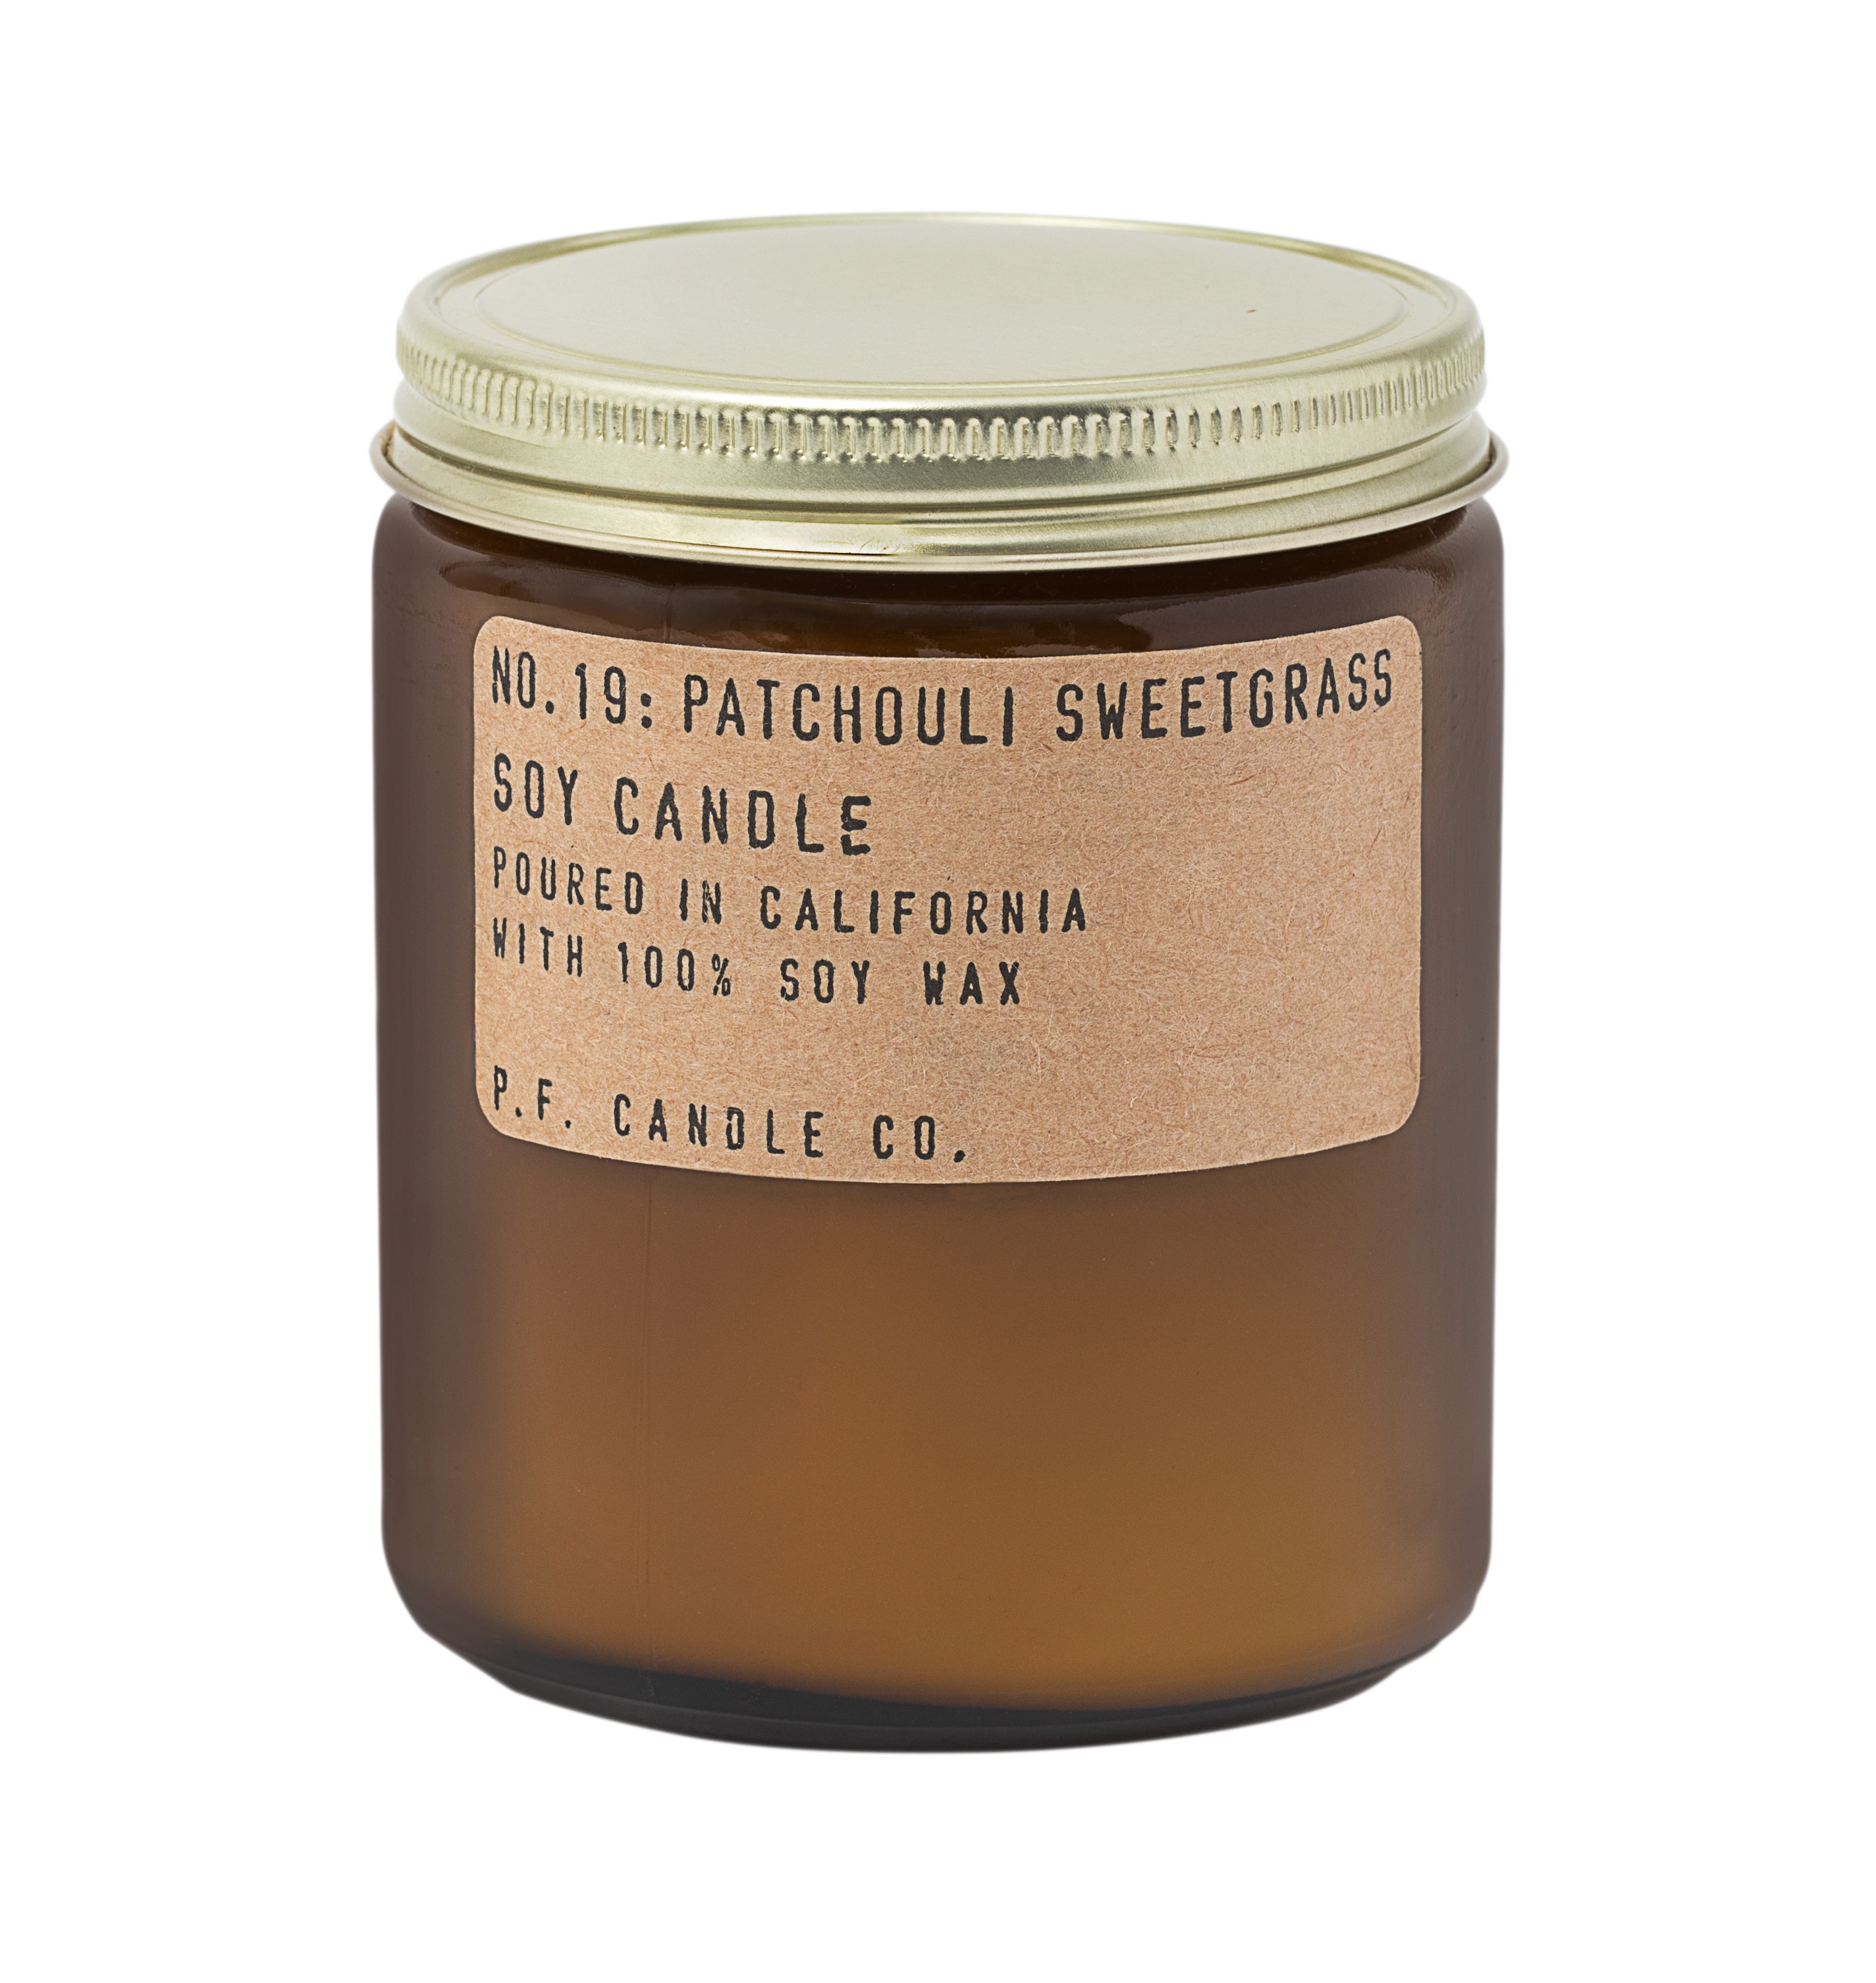 P.F. Candle Co. Patchouli Sweetgrass